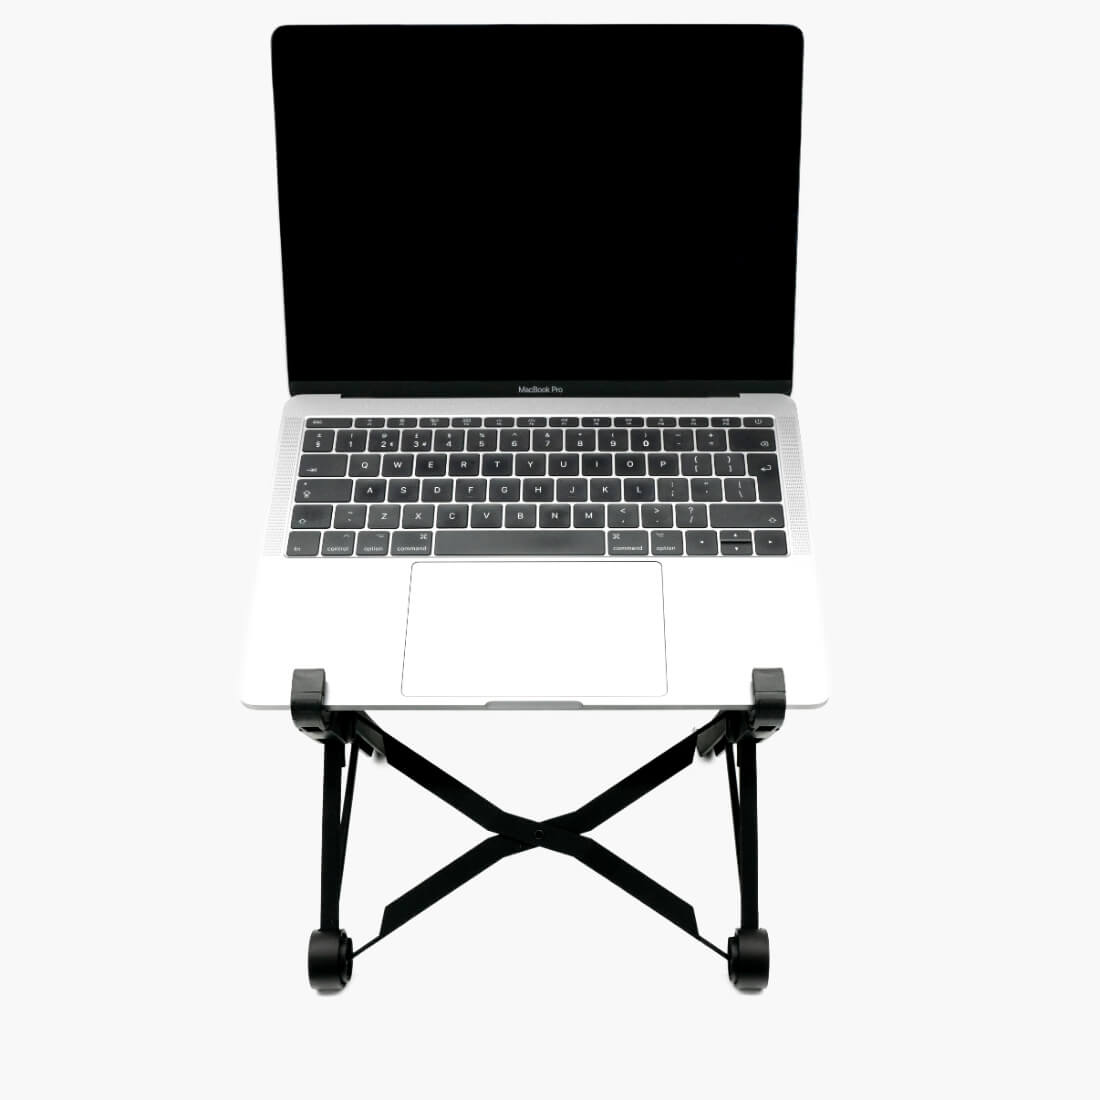 K2 Remote Work Kit - Laptop Stand, Keyboard and Mouse Bundle